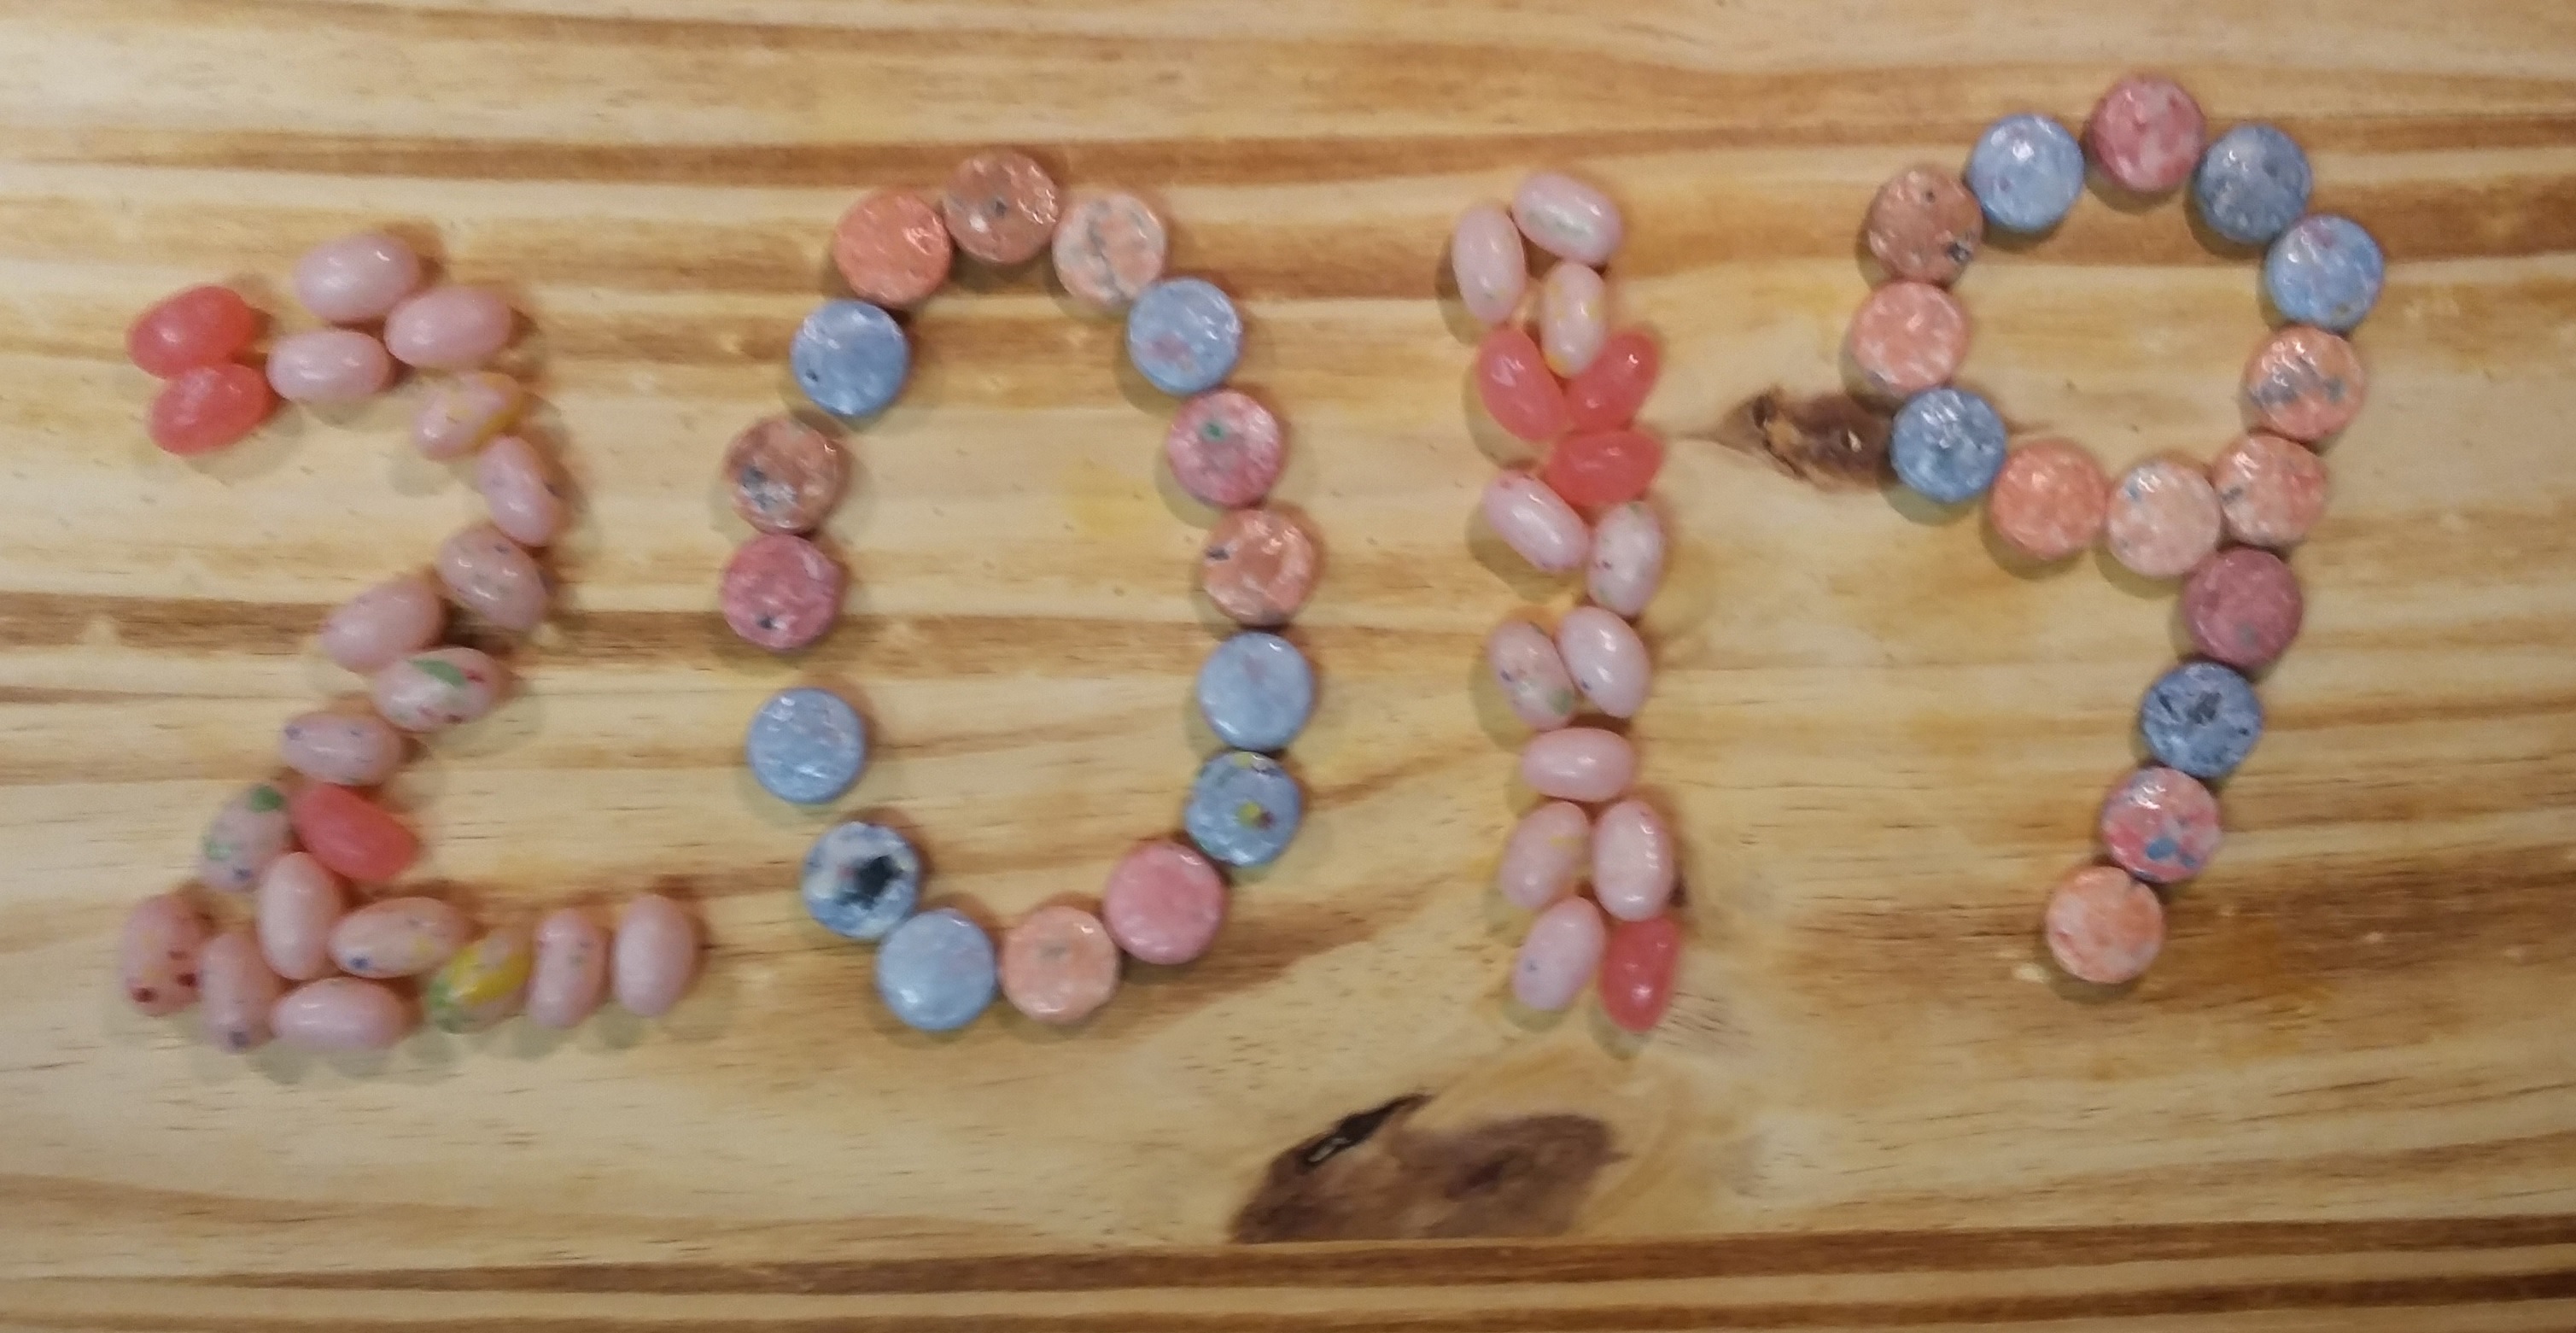 2019 spelled out in candy.